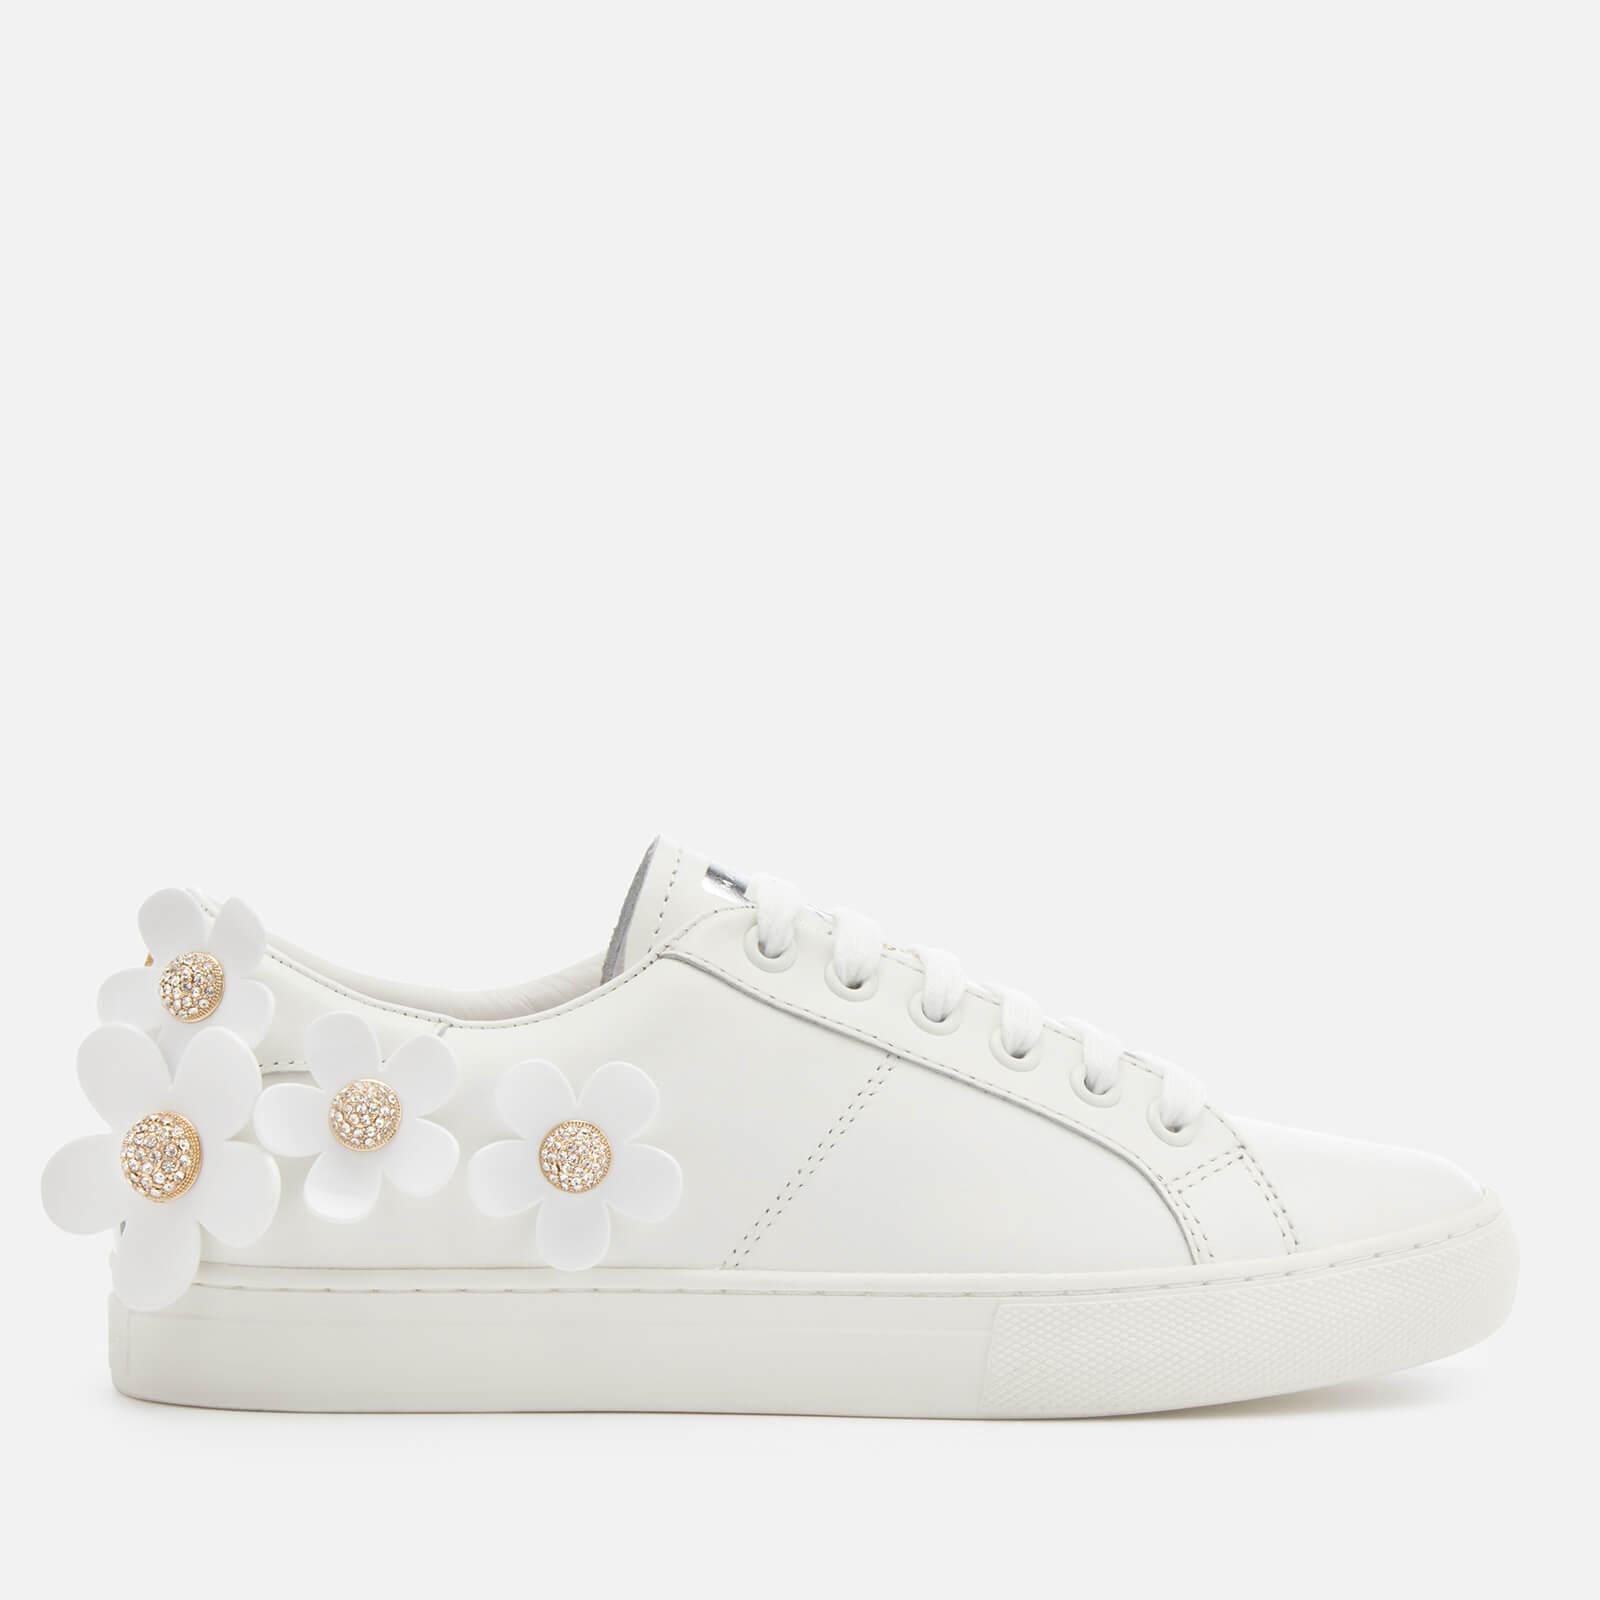 Marc Jacobs Daisy Embellished Leather Sneakers in White - Lyst